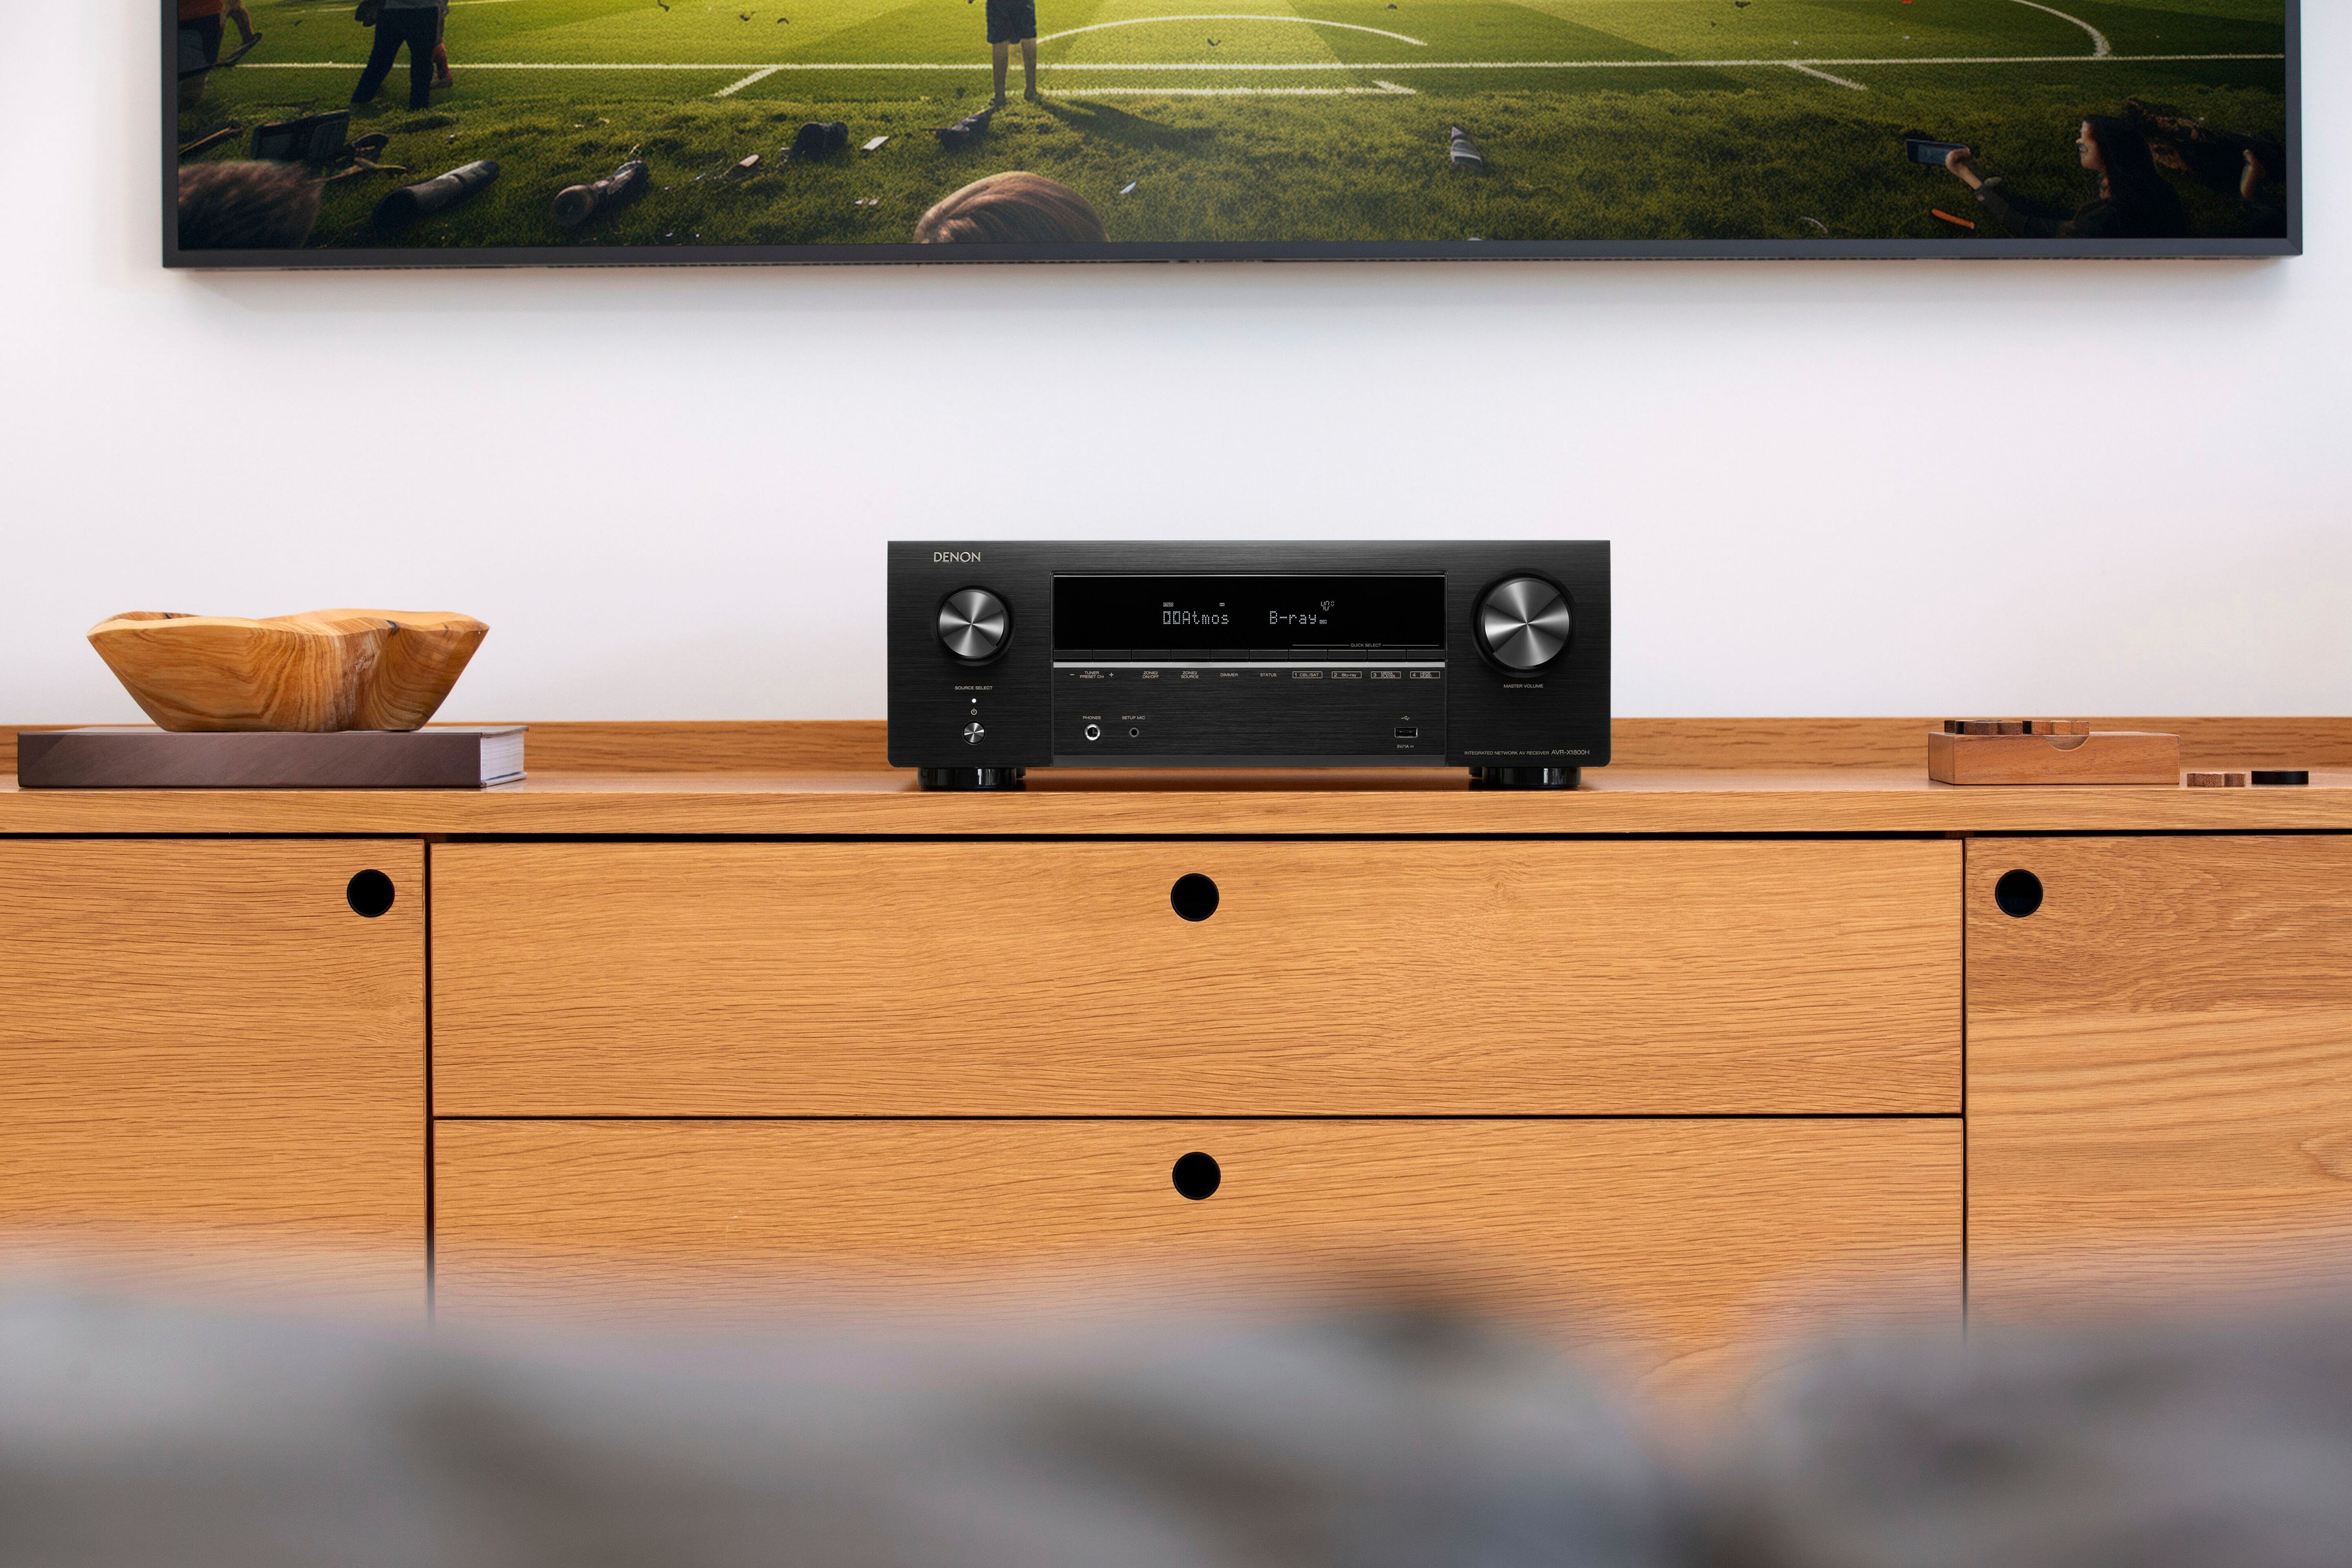 Receiver 80W HEOS HD Home AVR-X1800H Capable Compatible A/V Black Theater 7.2-Ch. Buy - Ultra AVRX1800H Bluetooth Built-In HDR 8K Denon Best with